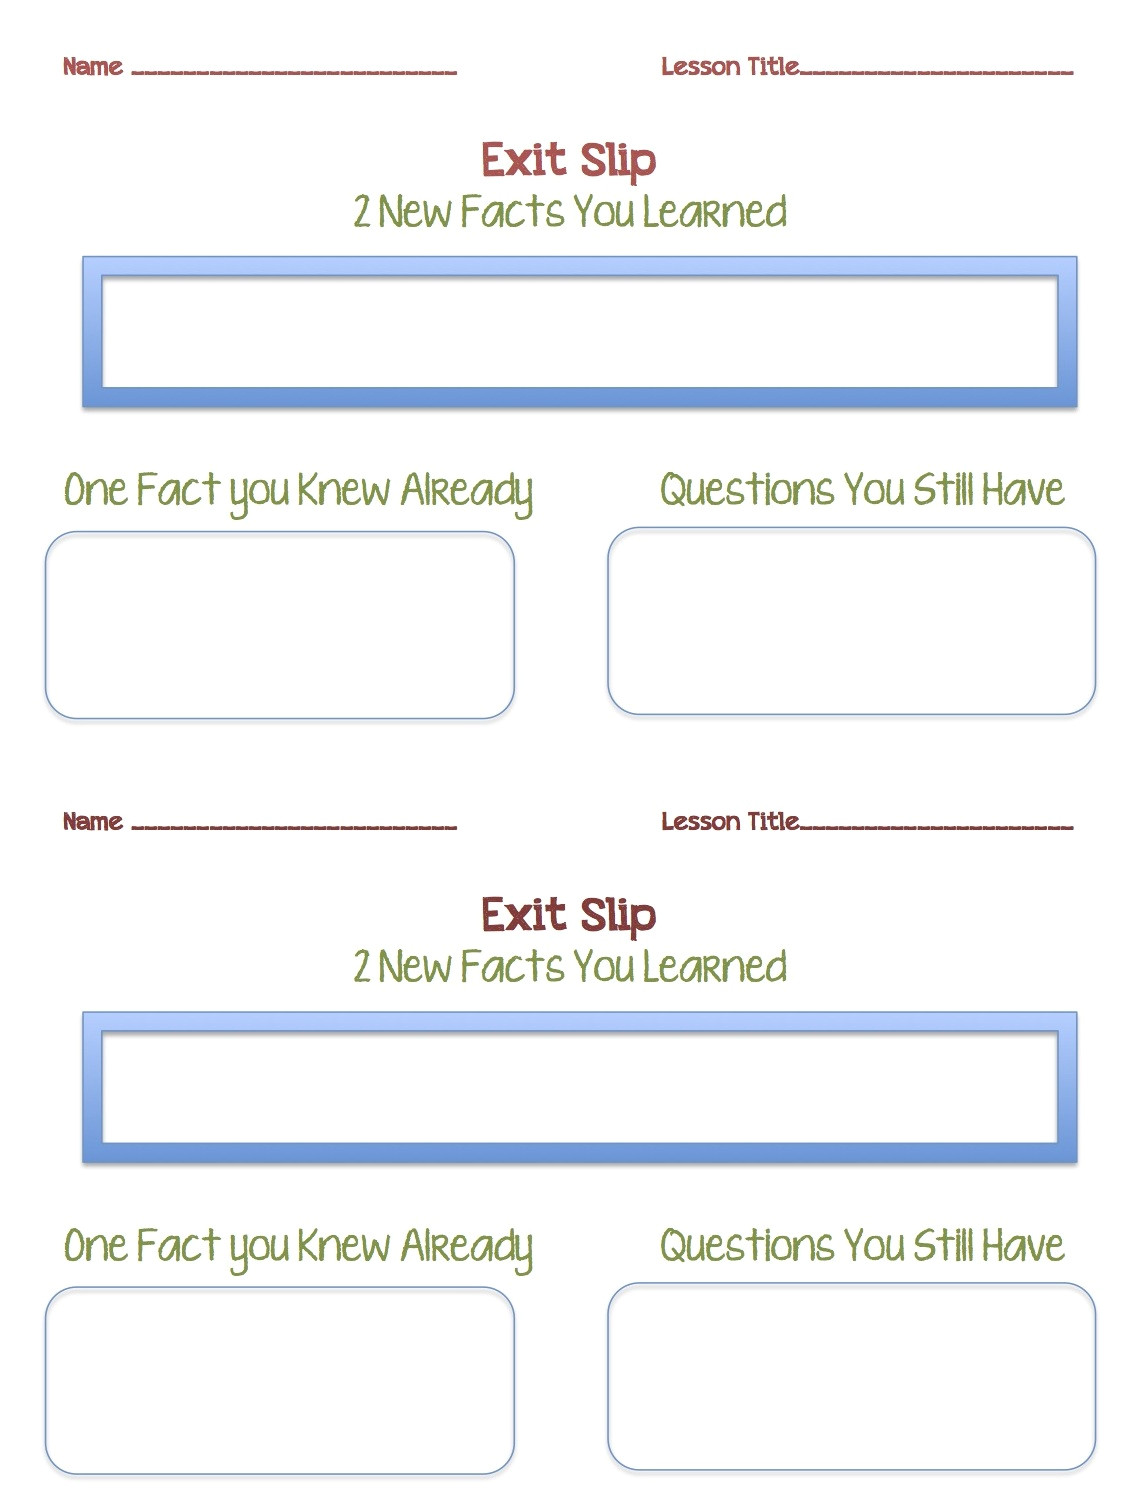 parent contact log and exit slip sheets